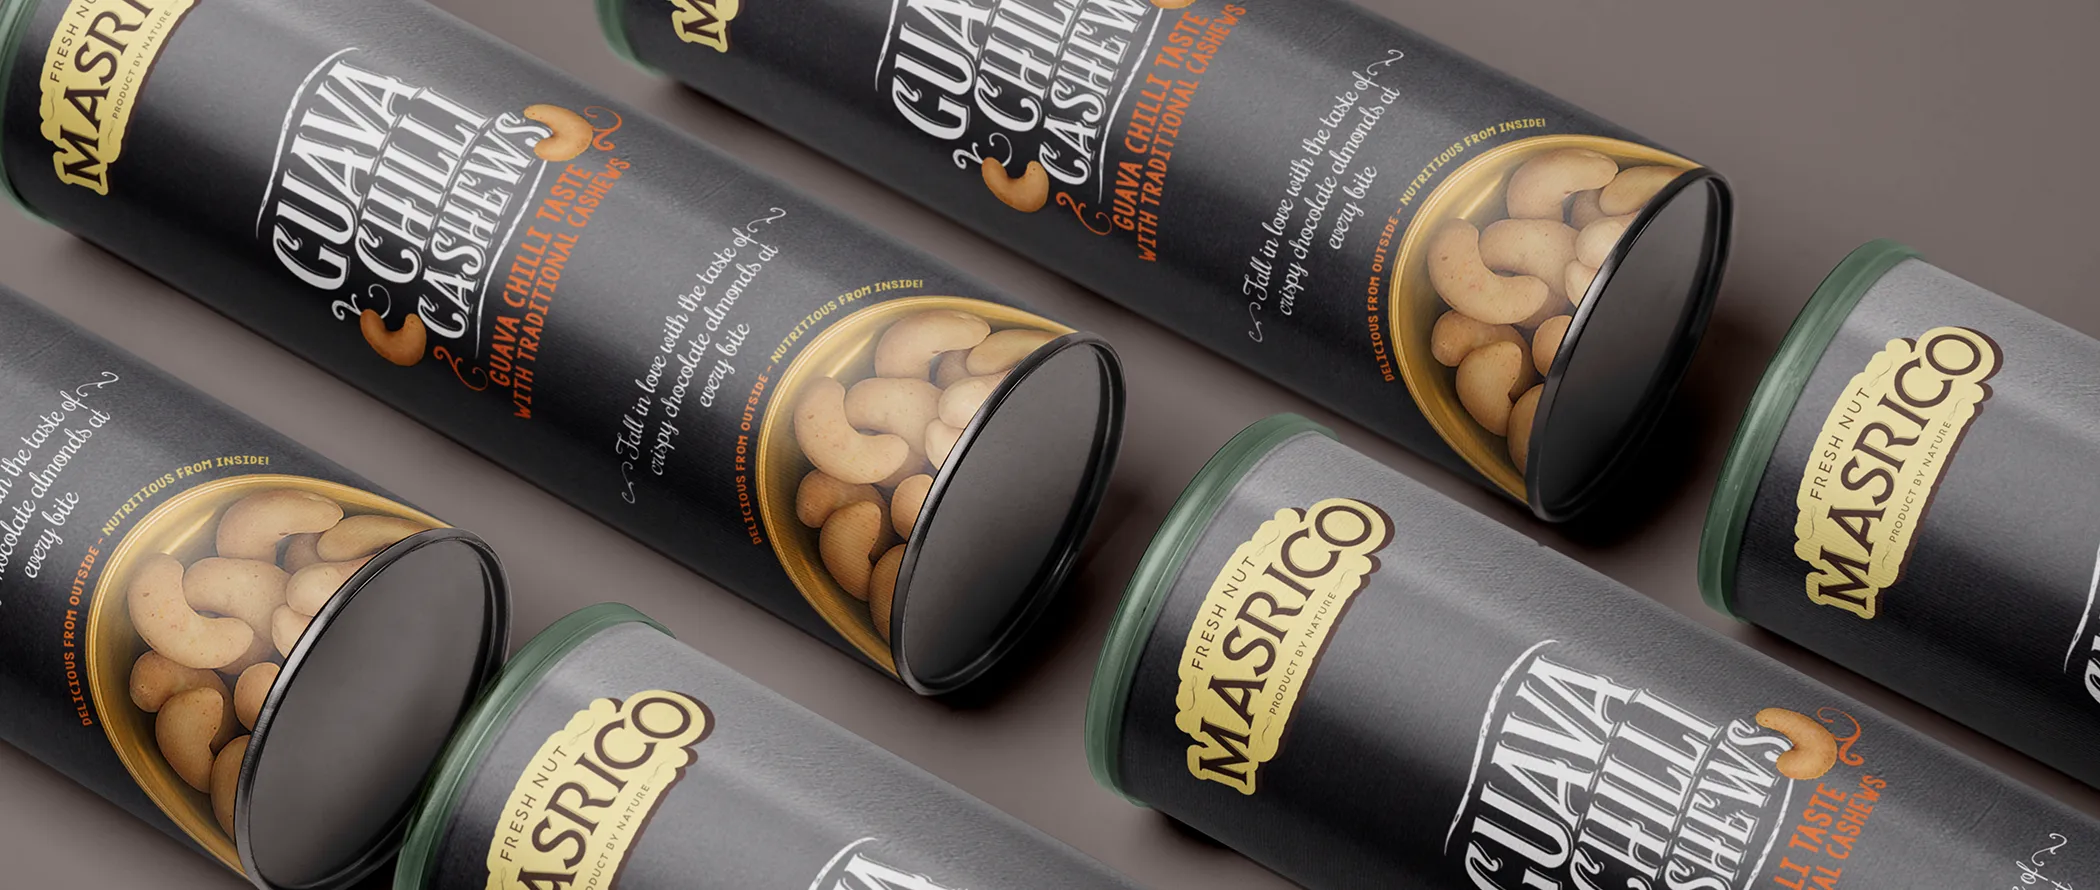 MAsrico paper tube packaging design 4 copy